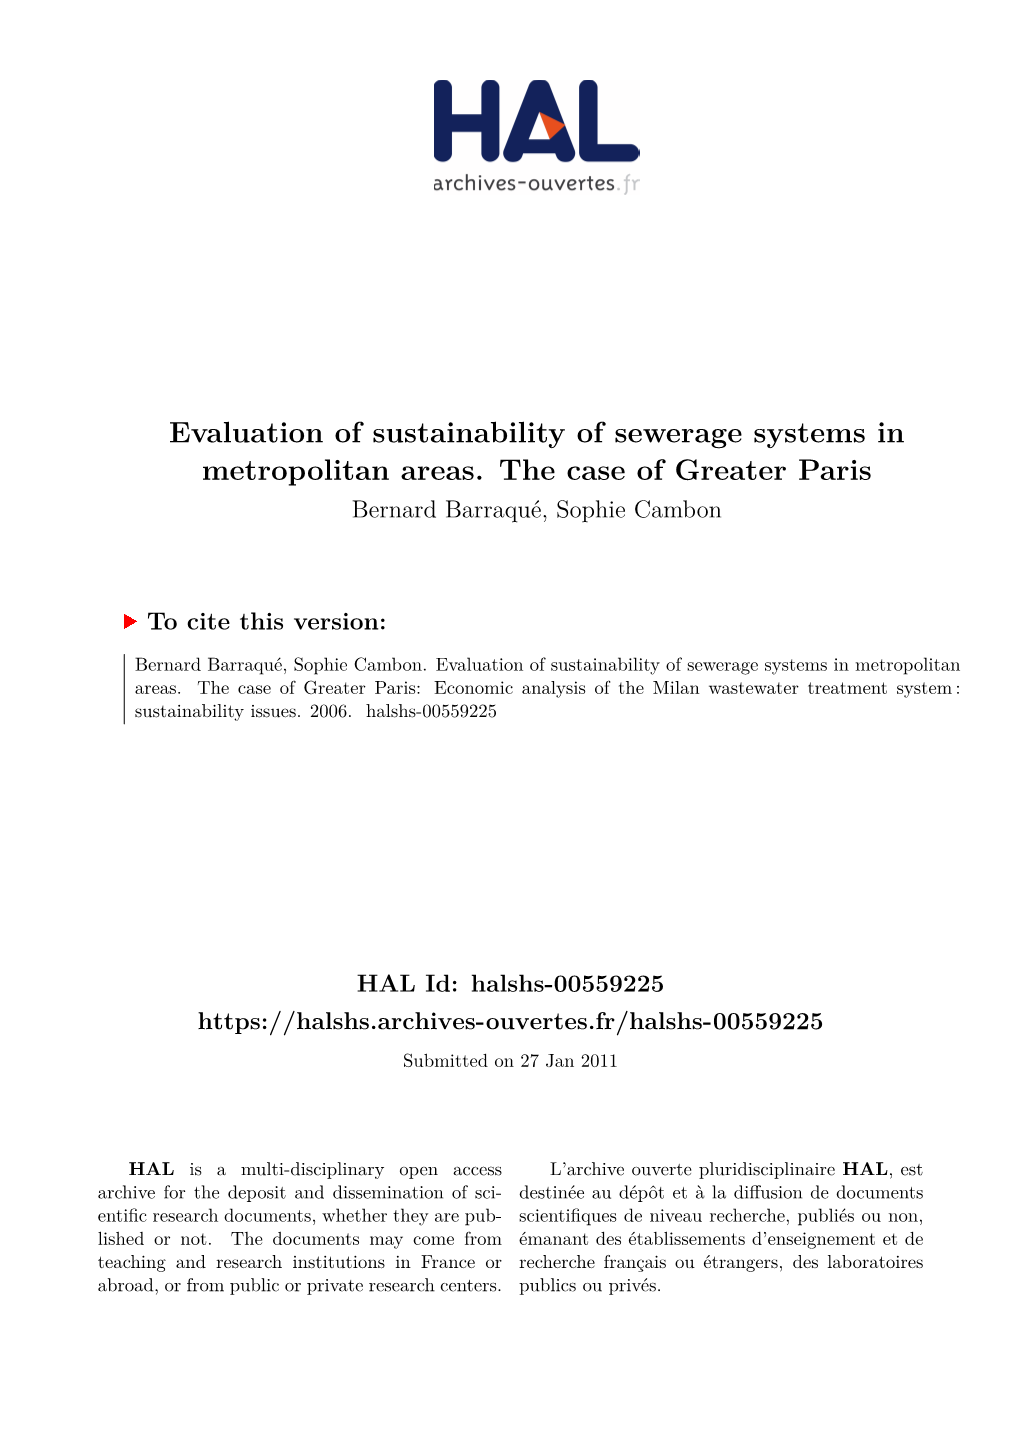 Evaluation of Sustainability of Sewerage Systems in Metropolitan Areas